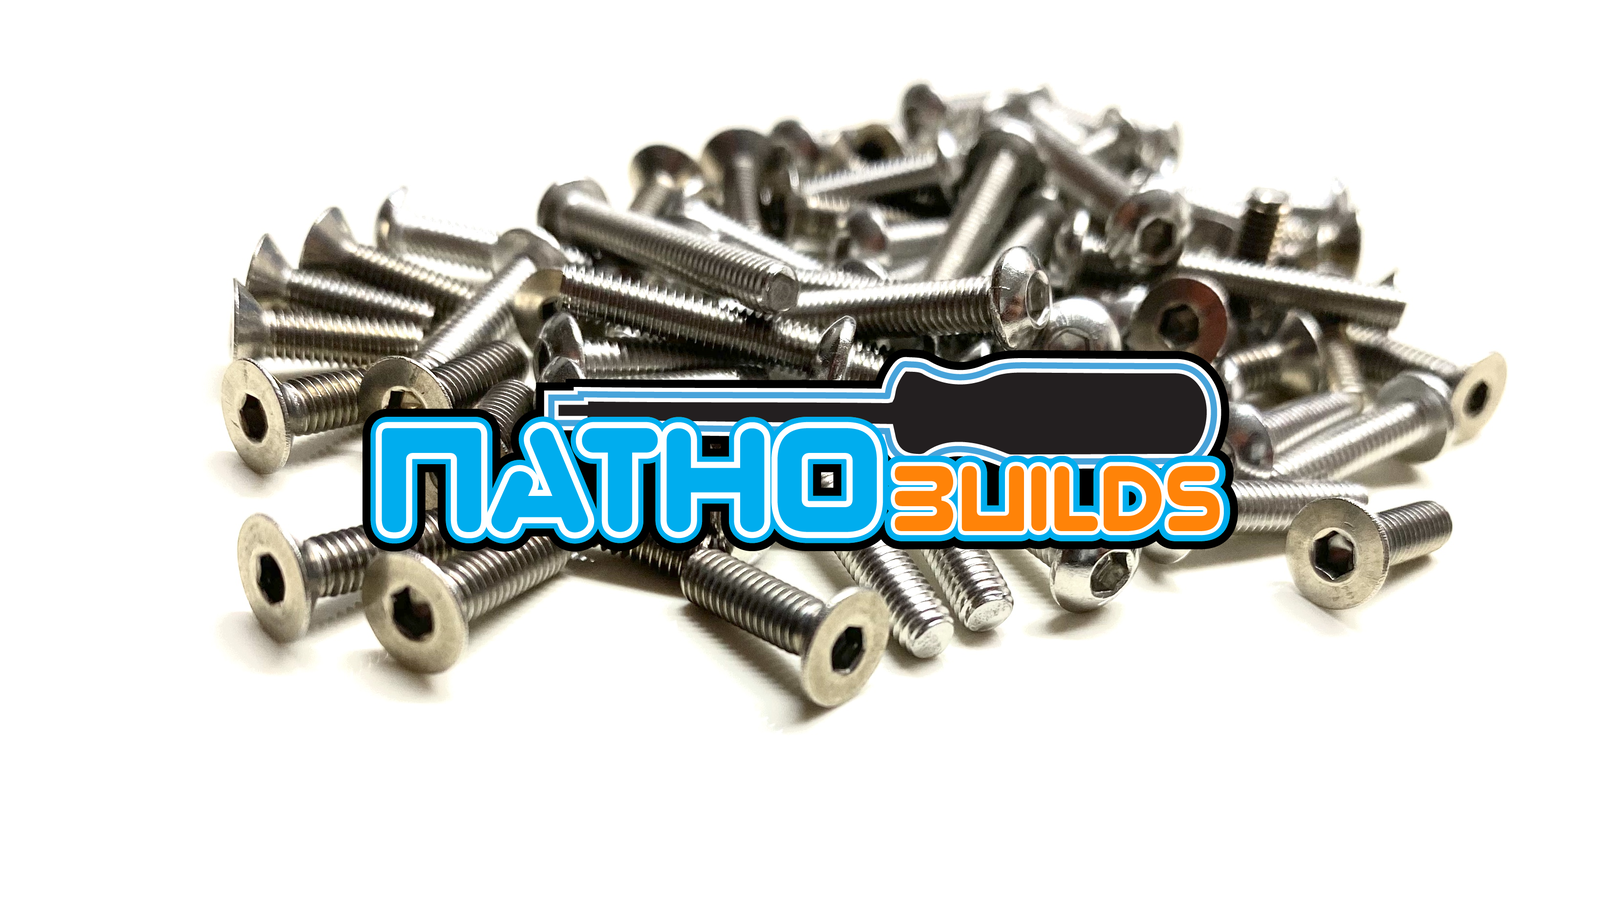 NathoBuilds: Stainless Steel Screw Kits for 1/8th - S-Workz S35-4E